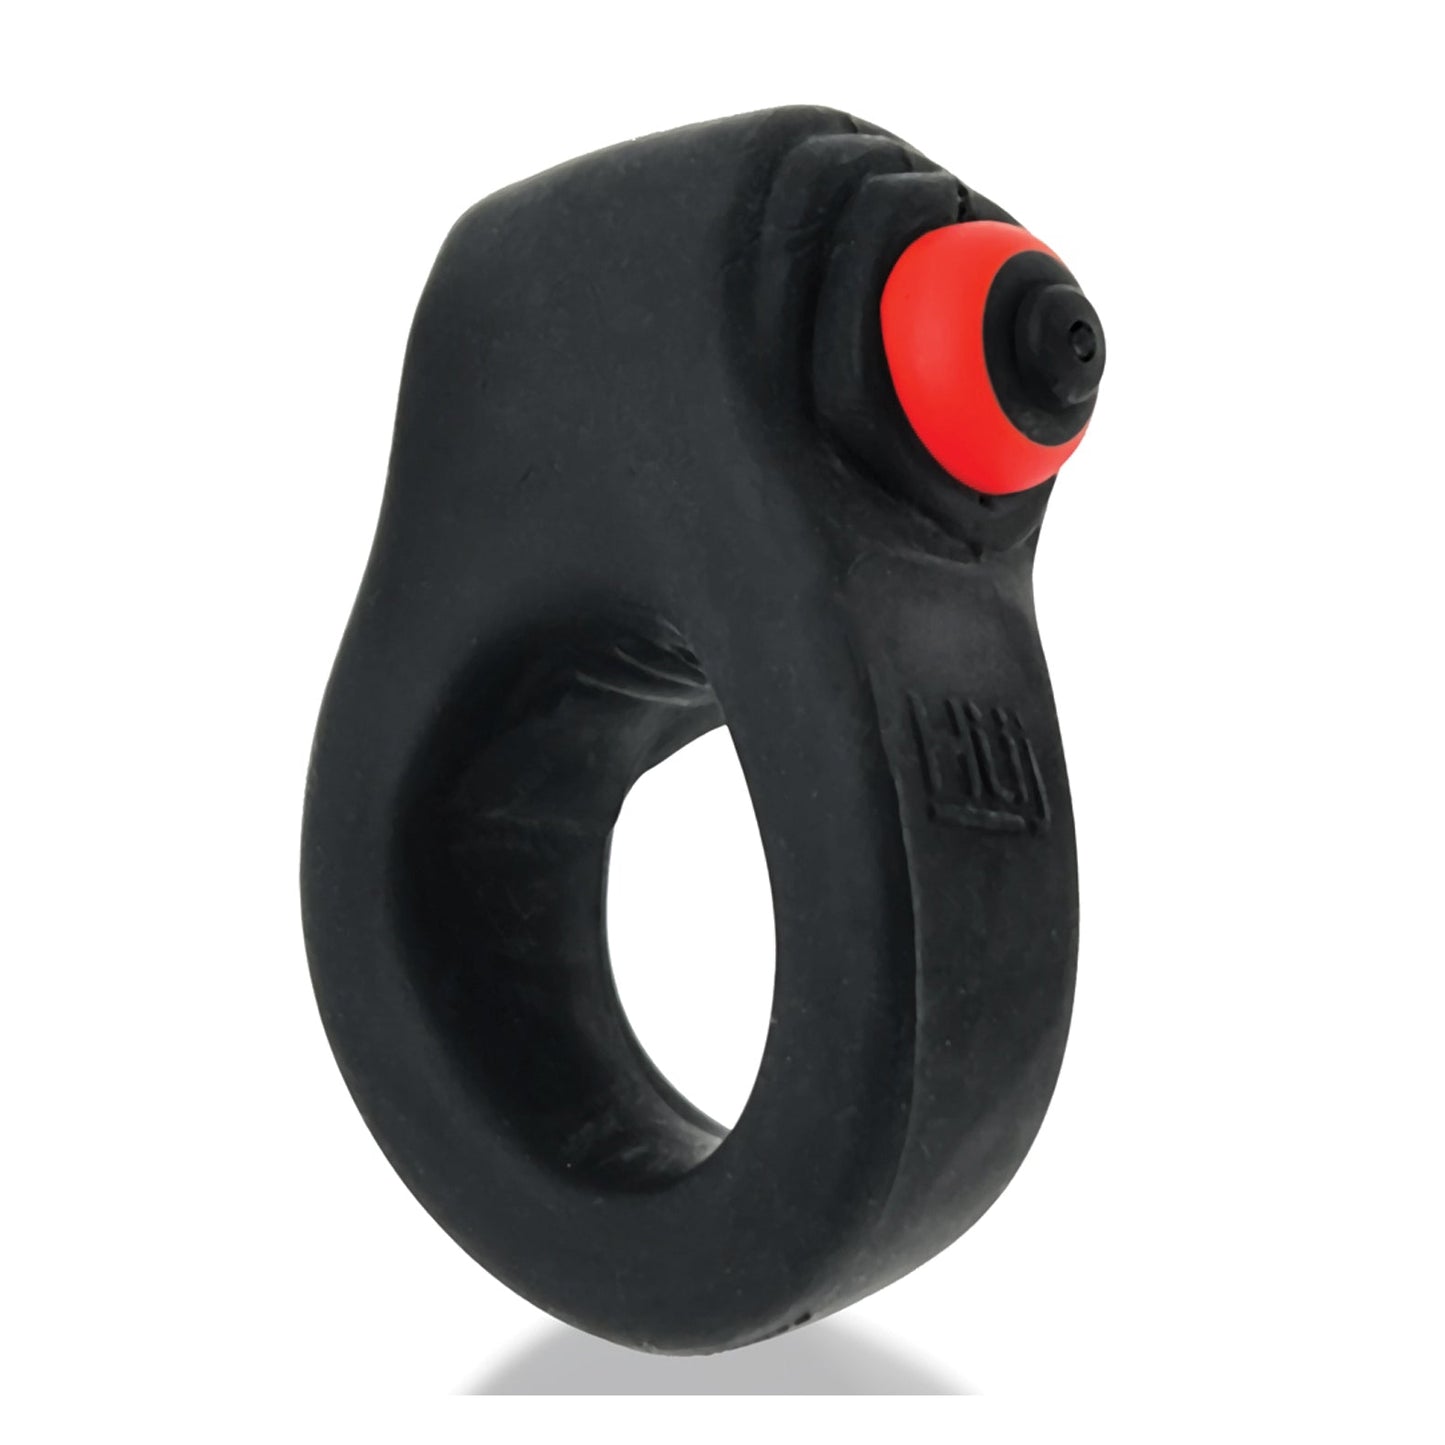 Hunky Junk Revring Cock Ring With Vibe